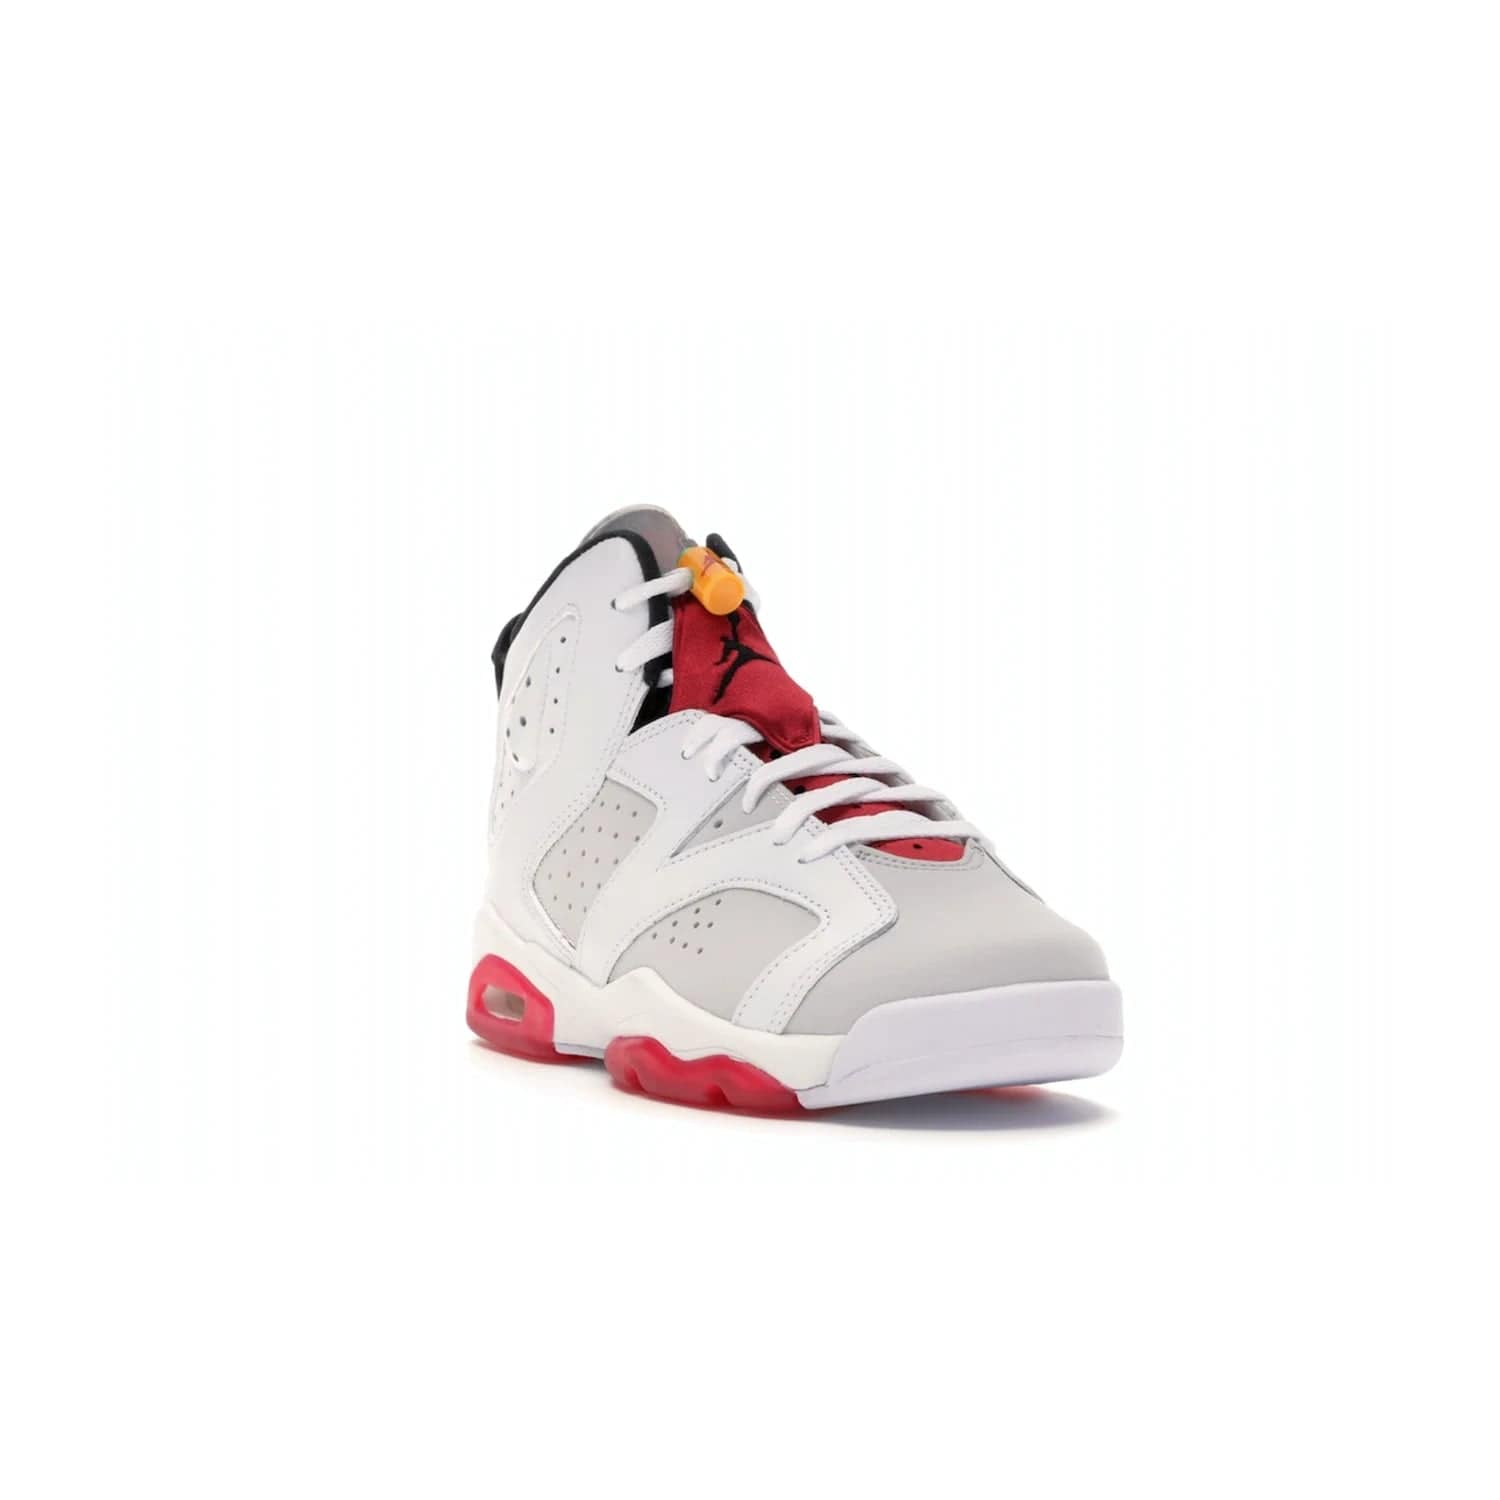 Jordan 6 Retro Hare (GS) - Image 7 - Only at www.BallersClubKickz.com - The Air Jordan 6 Hare GS. Comfortable suede upper, perforations, red pods, two-tone midsole, and signature "Jumpman" emblem. Released 17 June 2020. Perfect for any sneakerhead.